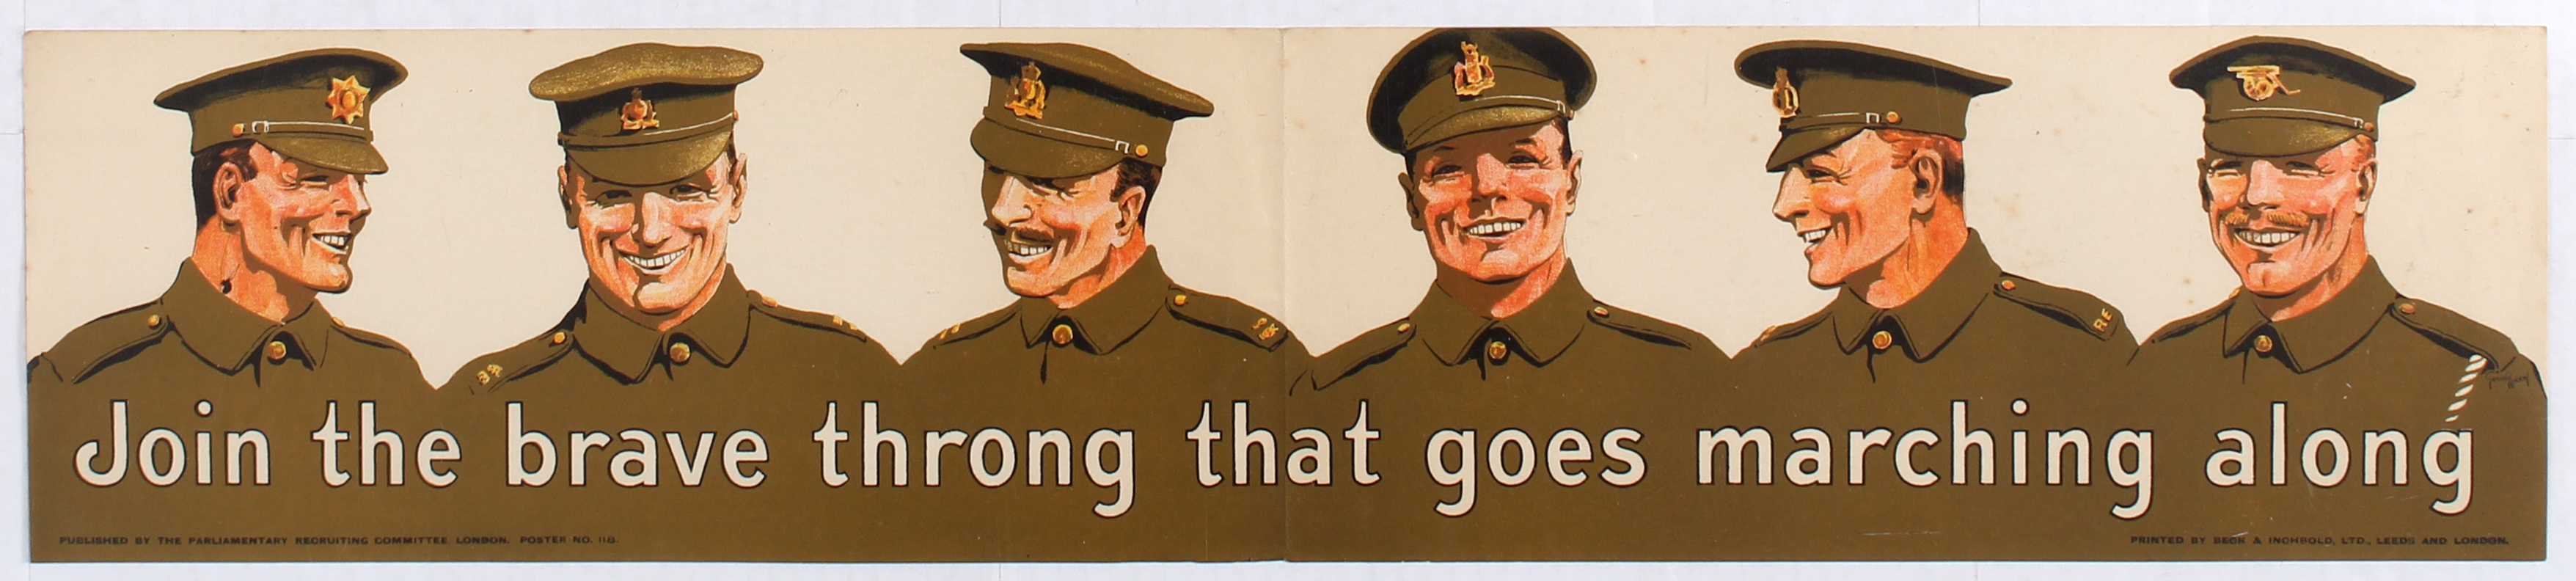 WWI Propaganda Poster Join the brave throng that goes marching along